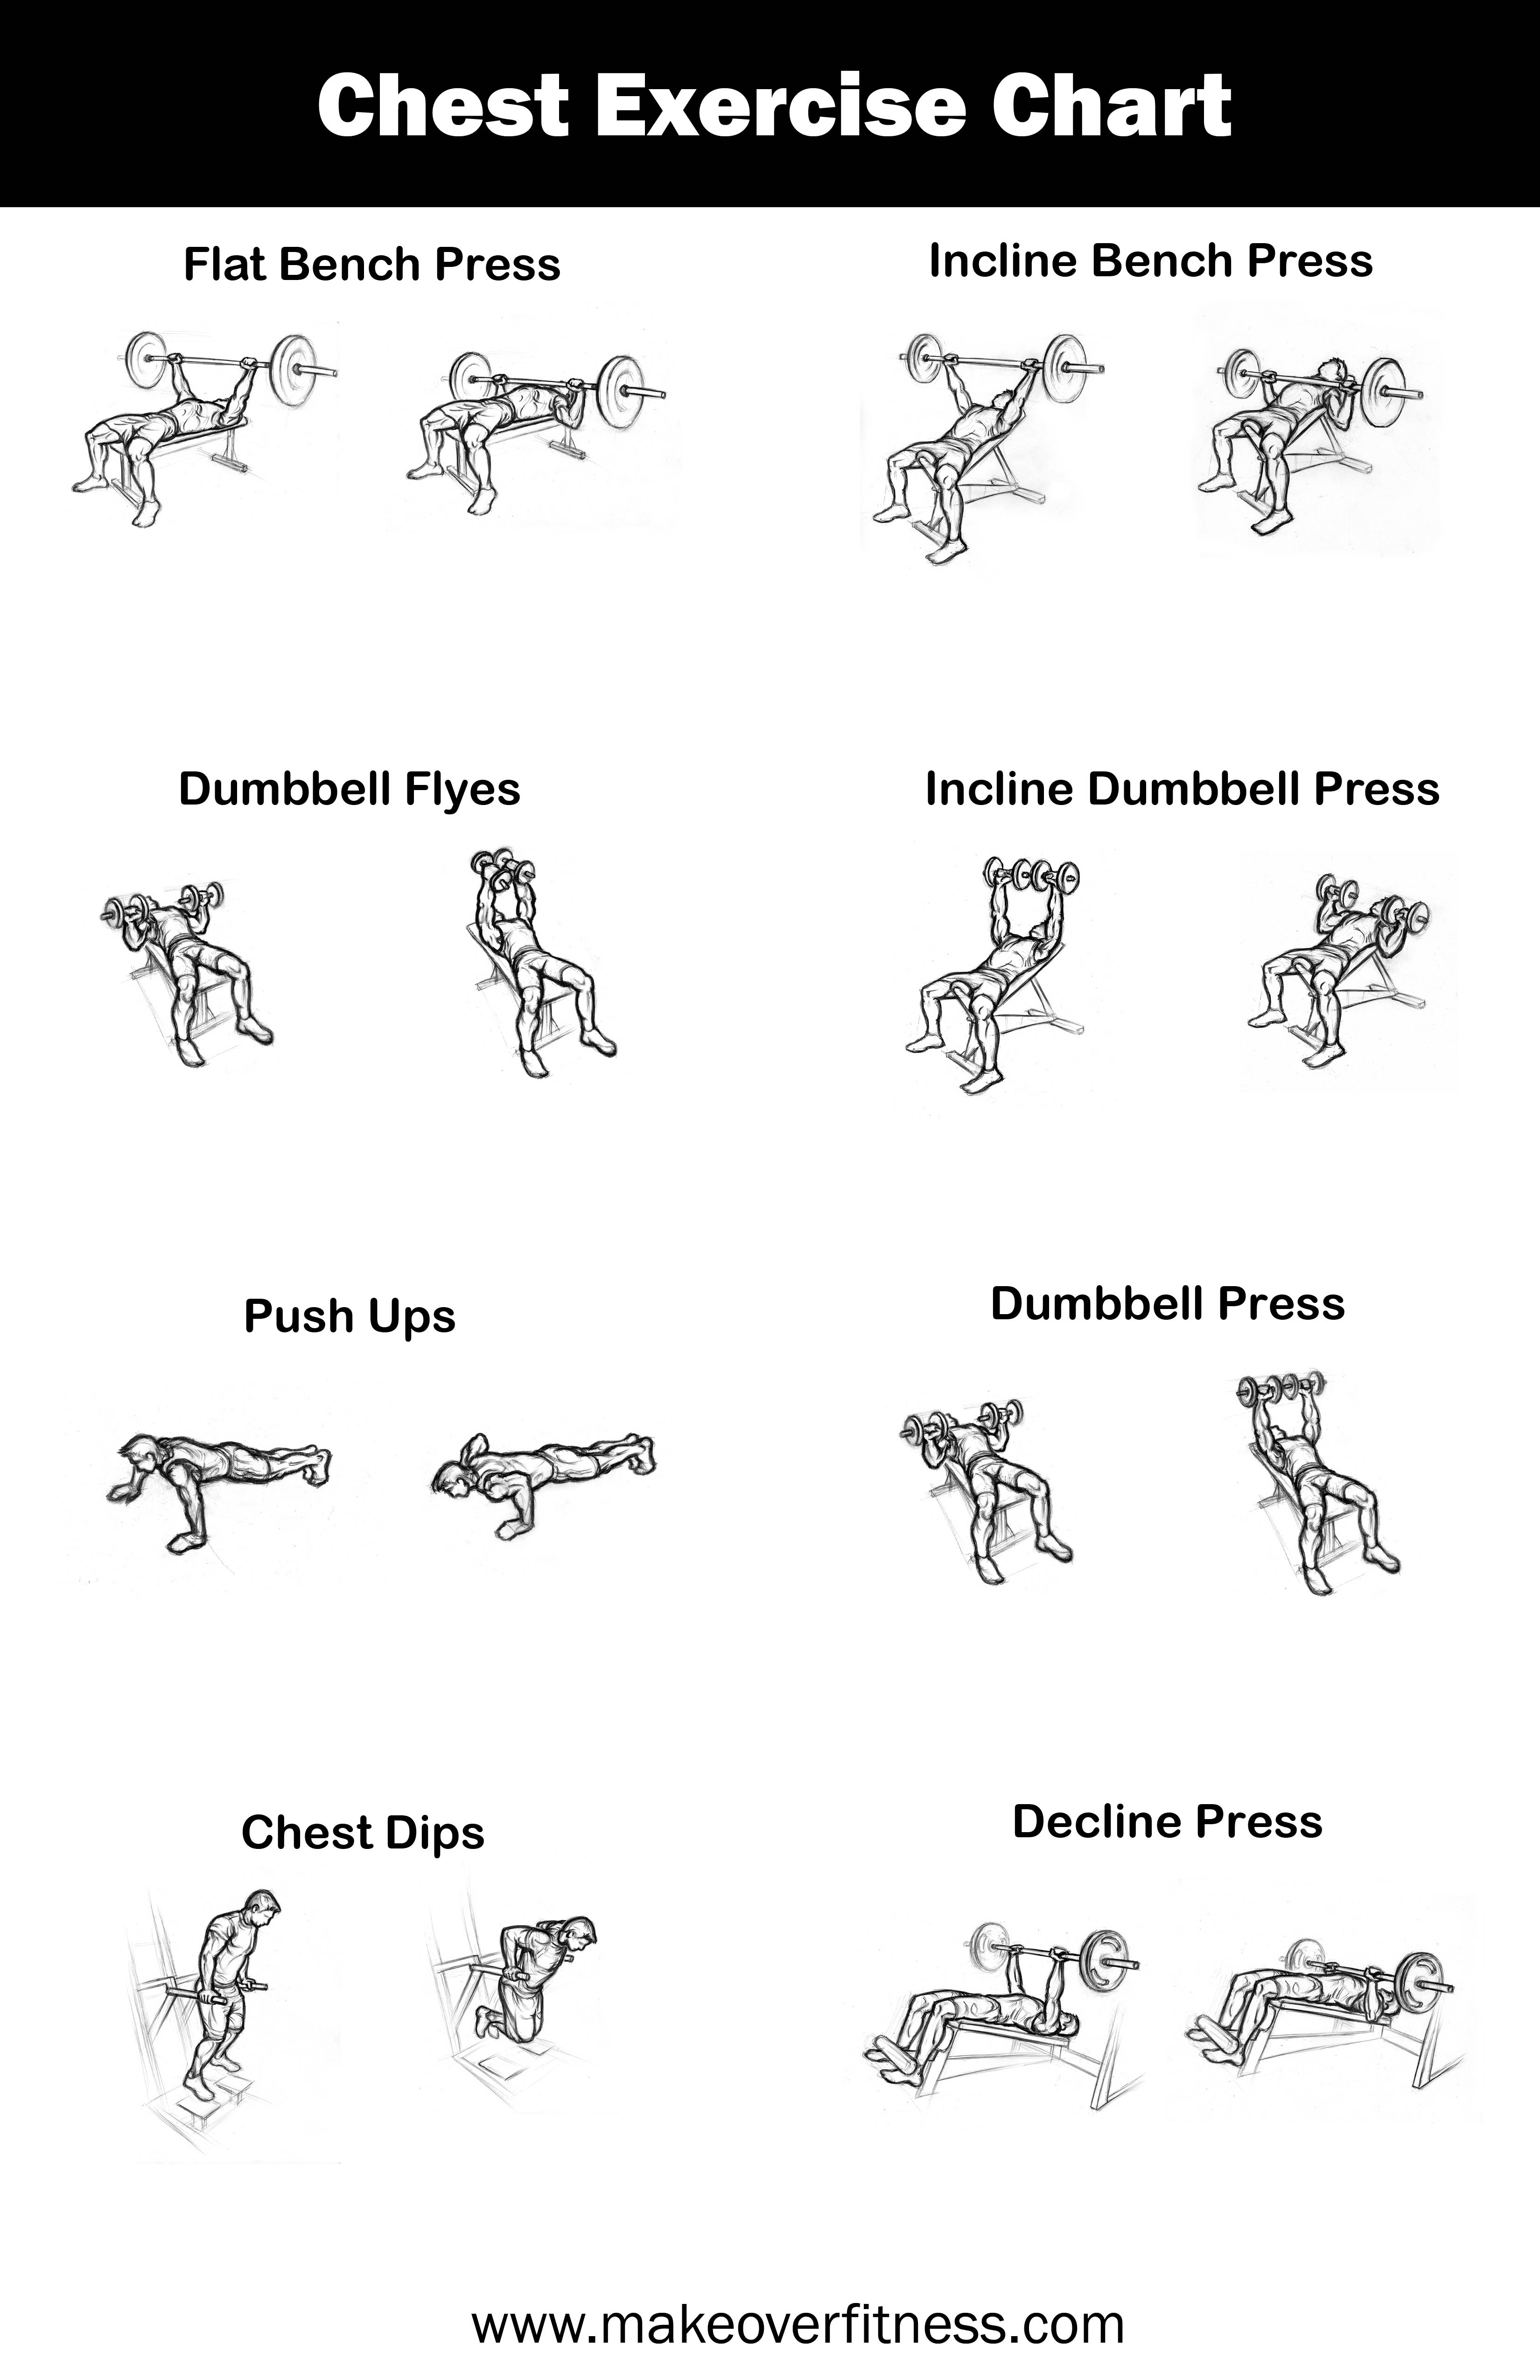 Free Fitness Charts: Printable Exercise Routines & Workouts to